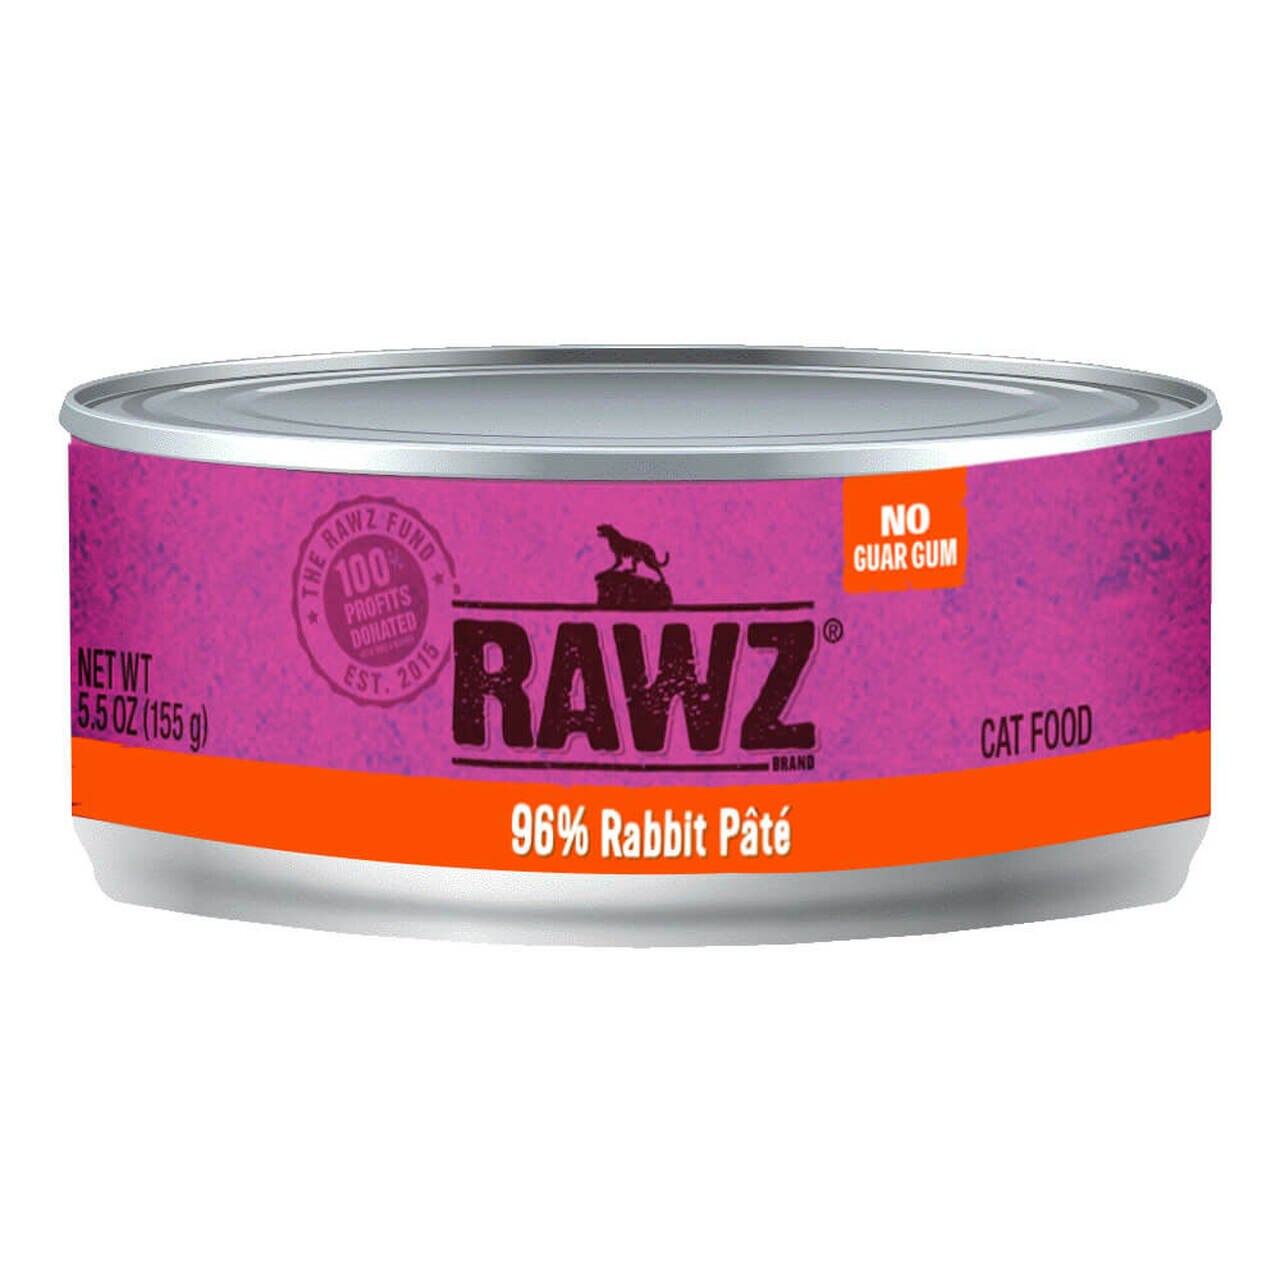 RAWZ 96% Rabbit Pate Canned Cat Food 24-Pack 5.5oz